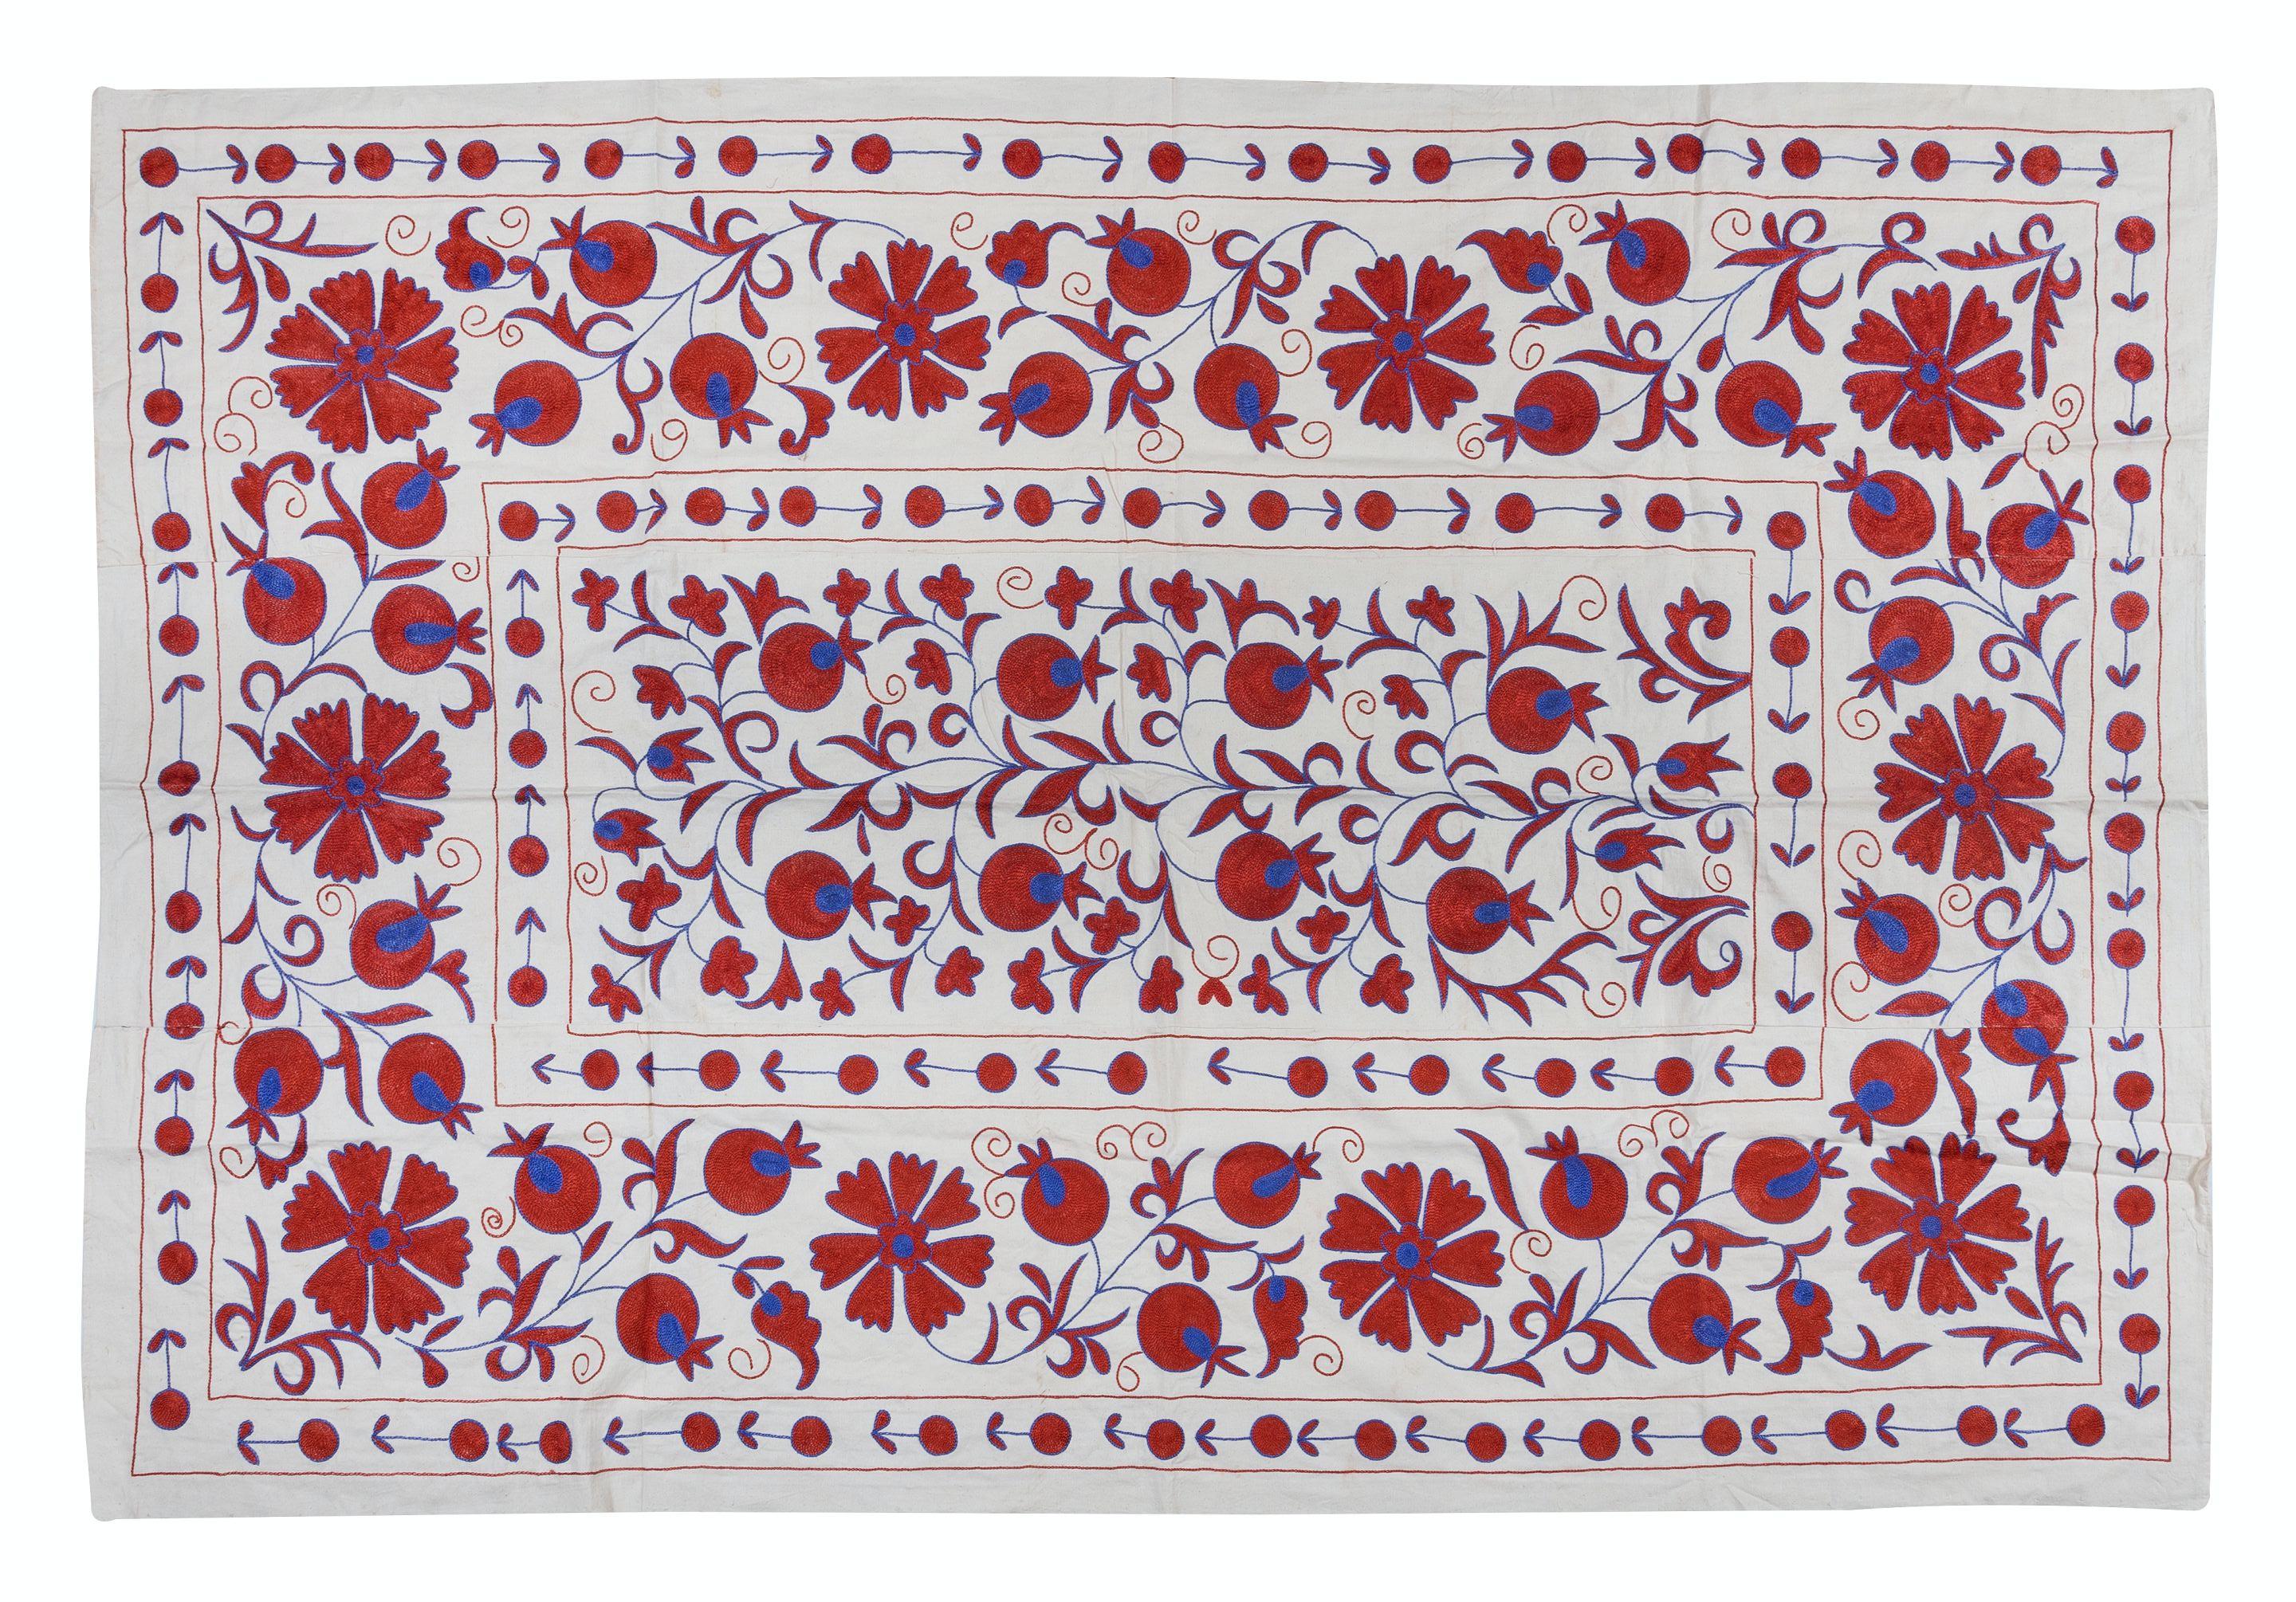 Uzbek 4.8x7.2 ft Crochet Wall Hanging. Silk Embroidery Bed Cover. Handmade Bedding For Sale